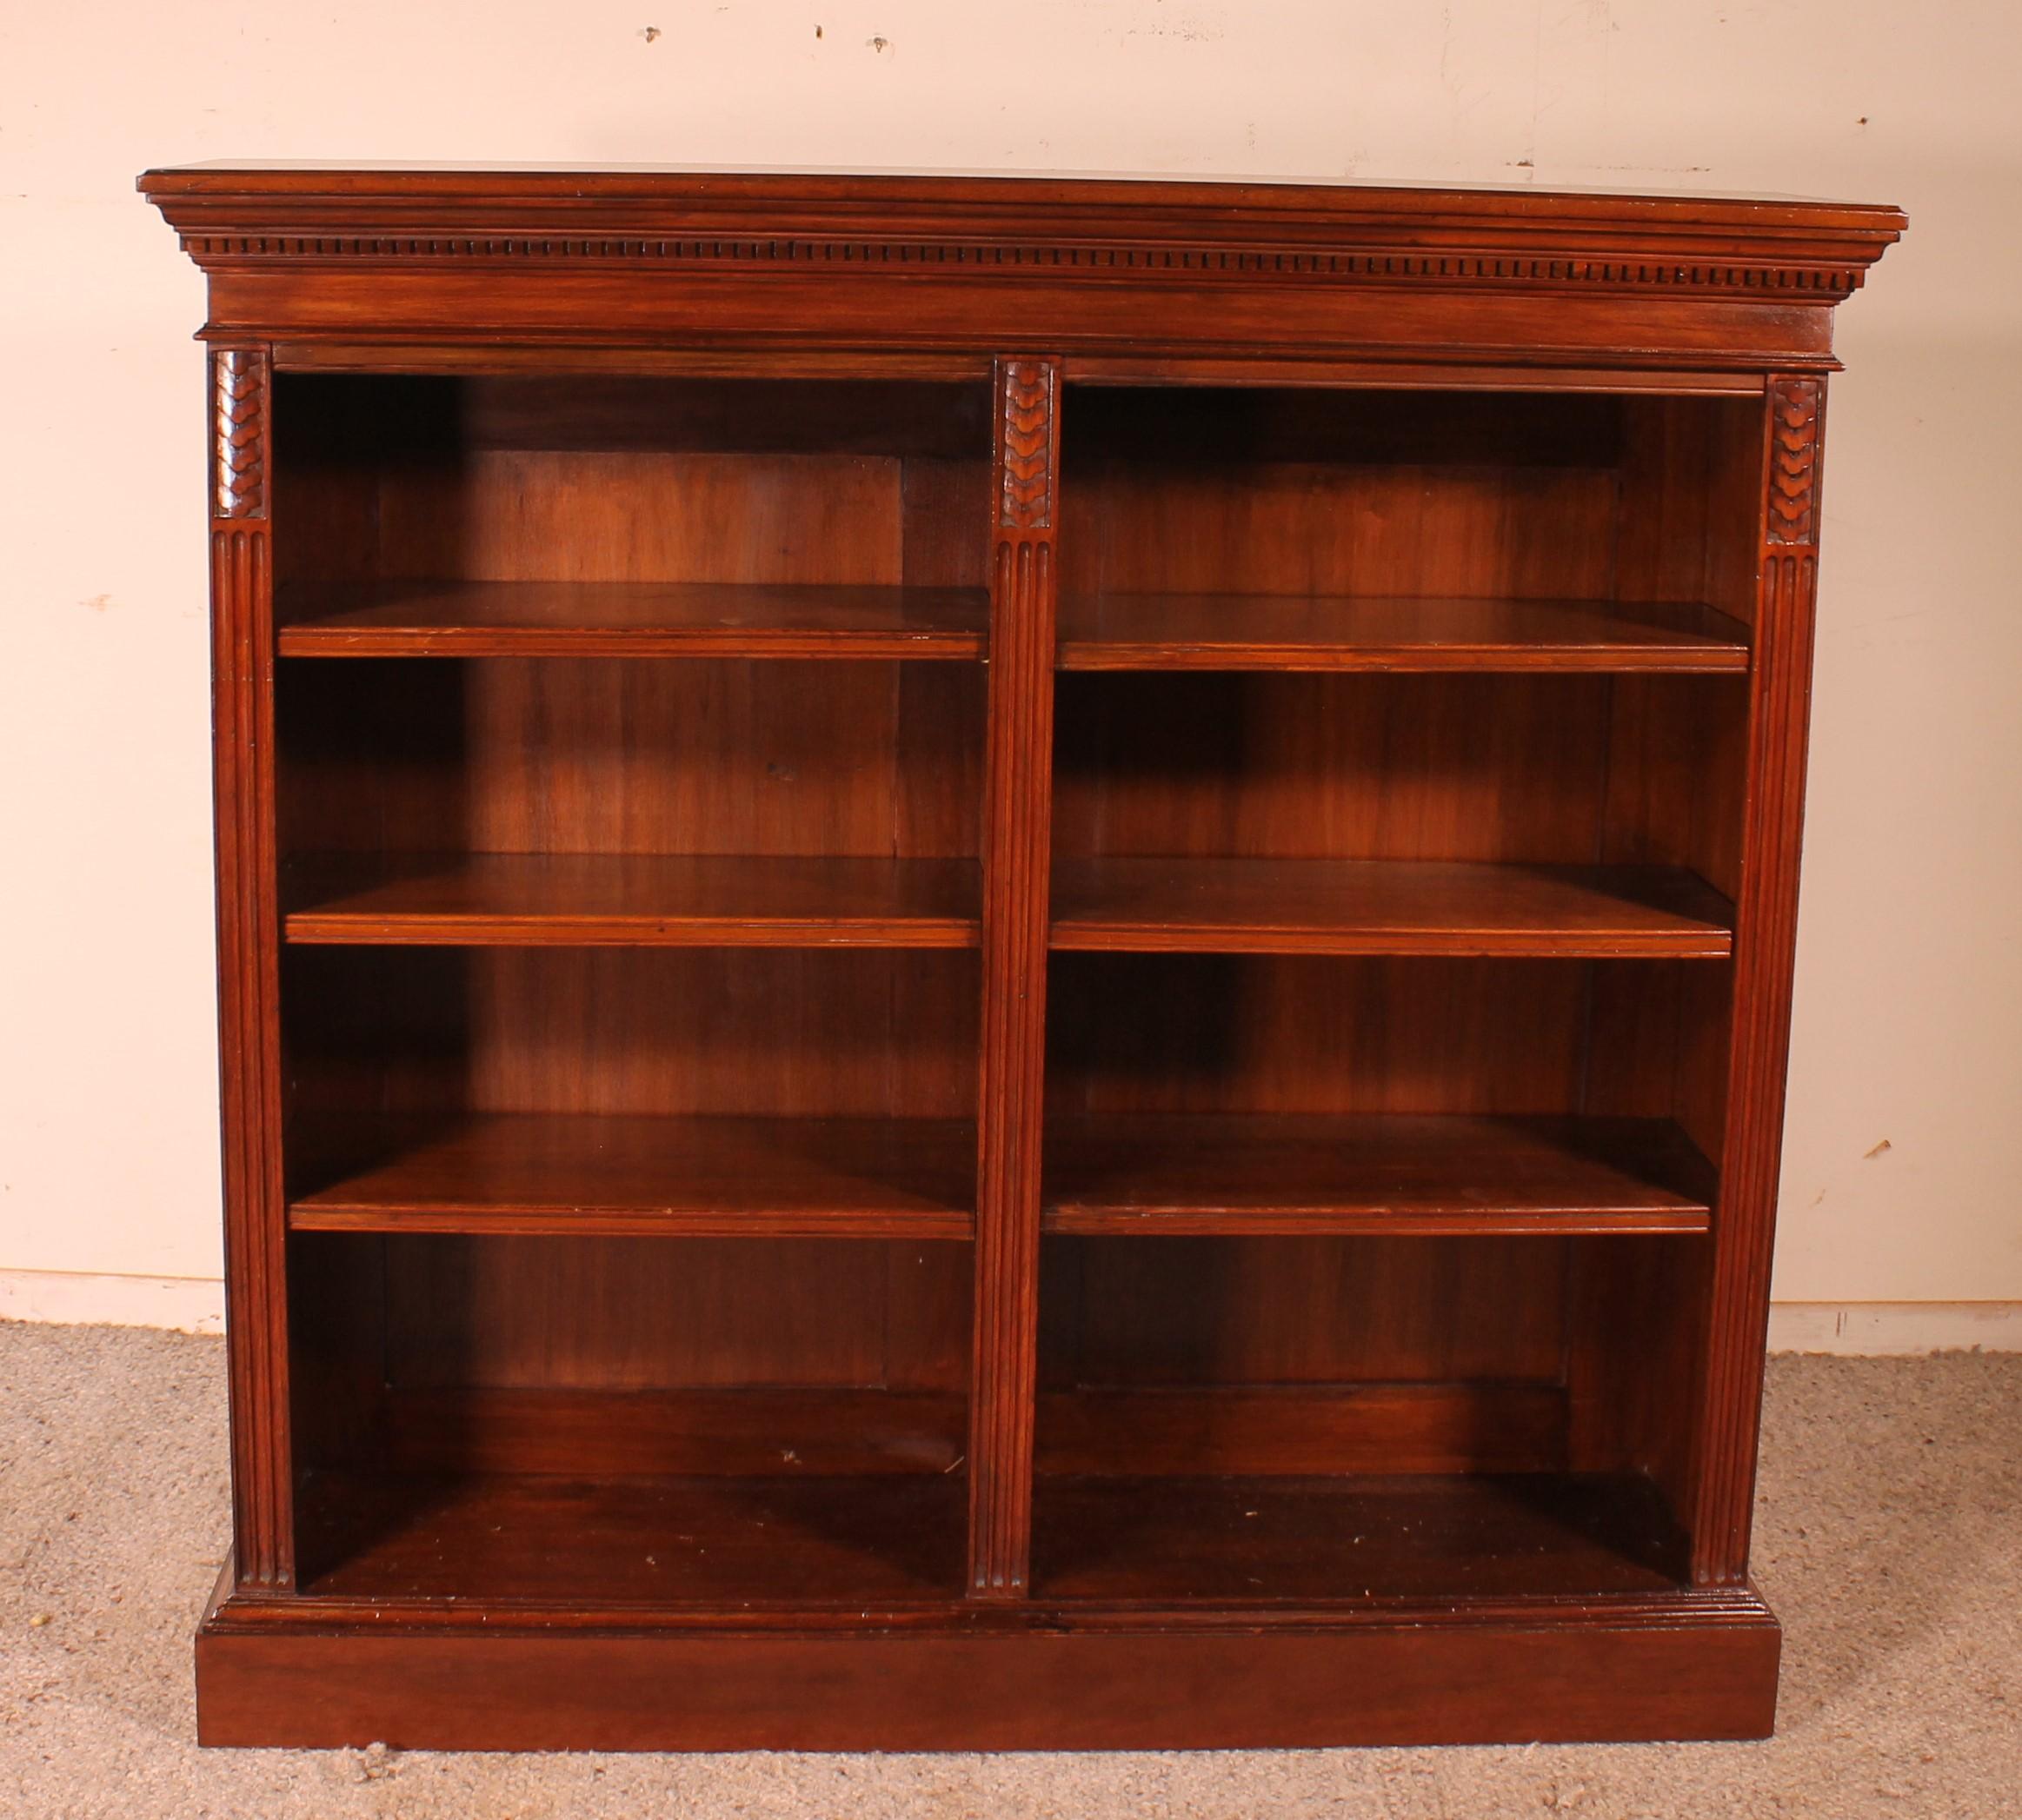 Elegant open bookcase in mahogany from the second half of the 19th century from England
Superb large model which has two compartments which is unusual. Very beautiful carved top and uprights decorated with grooves
Original shelves with a beautiful